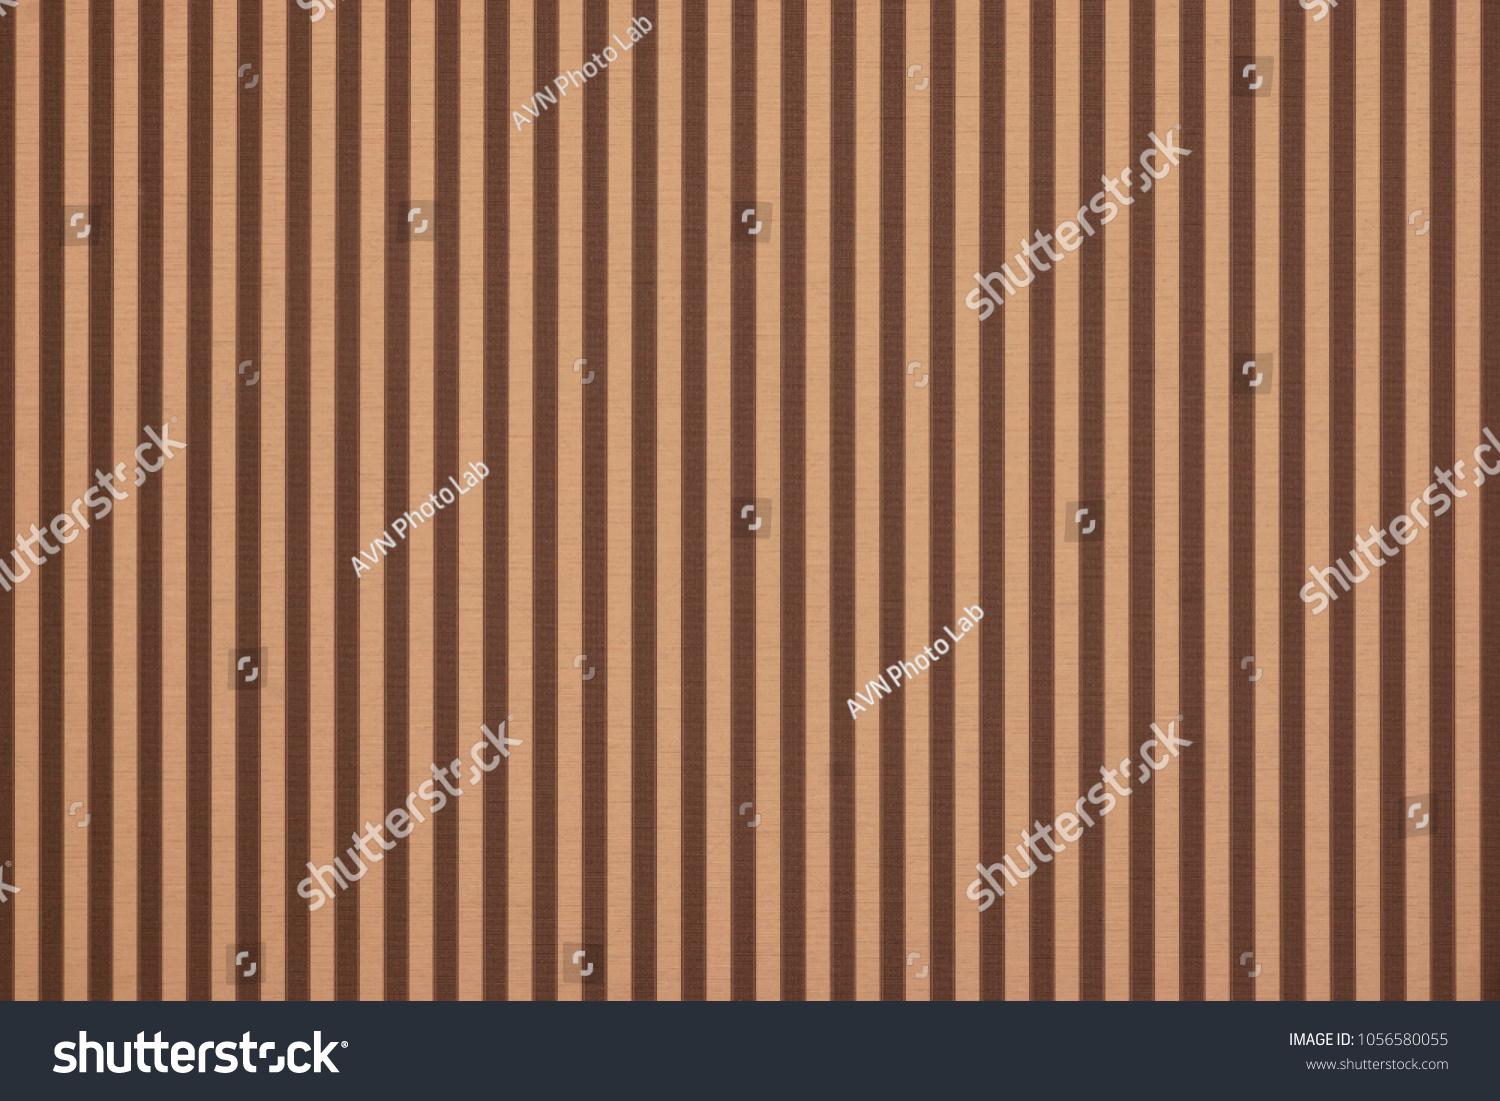 Abstract Striped Paper Texture. Vintage Background With Vertical Brown Stripes. Modern Color Wallpaper With Striped Retro Pattern. Colorful Geometric Classic Backdrop. #1056580055